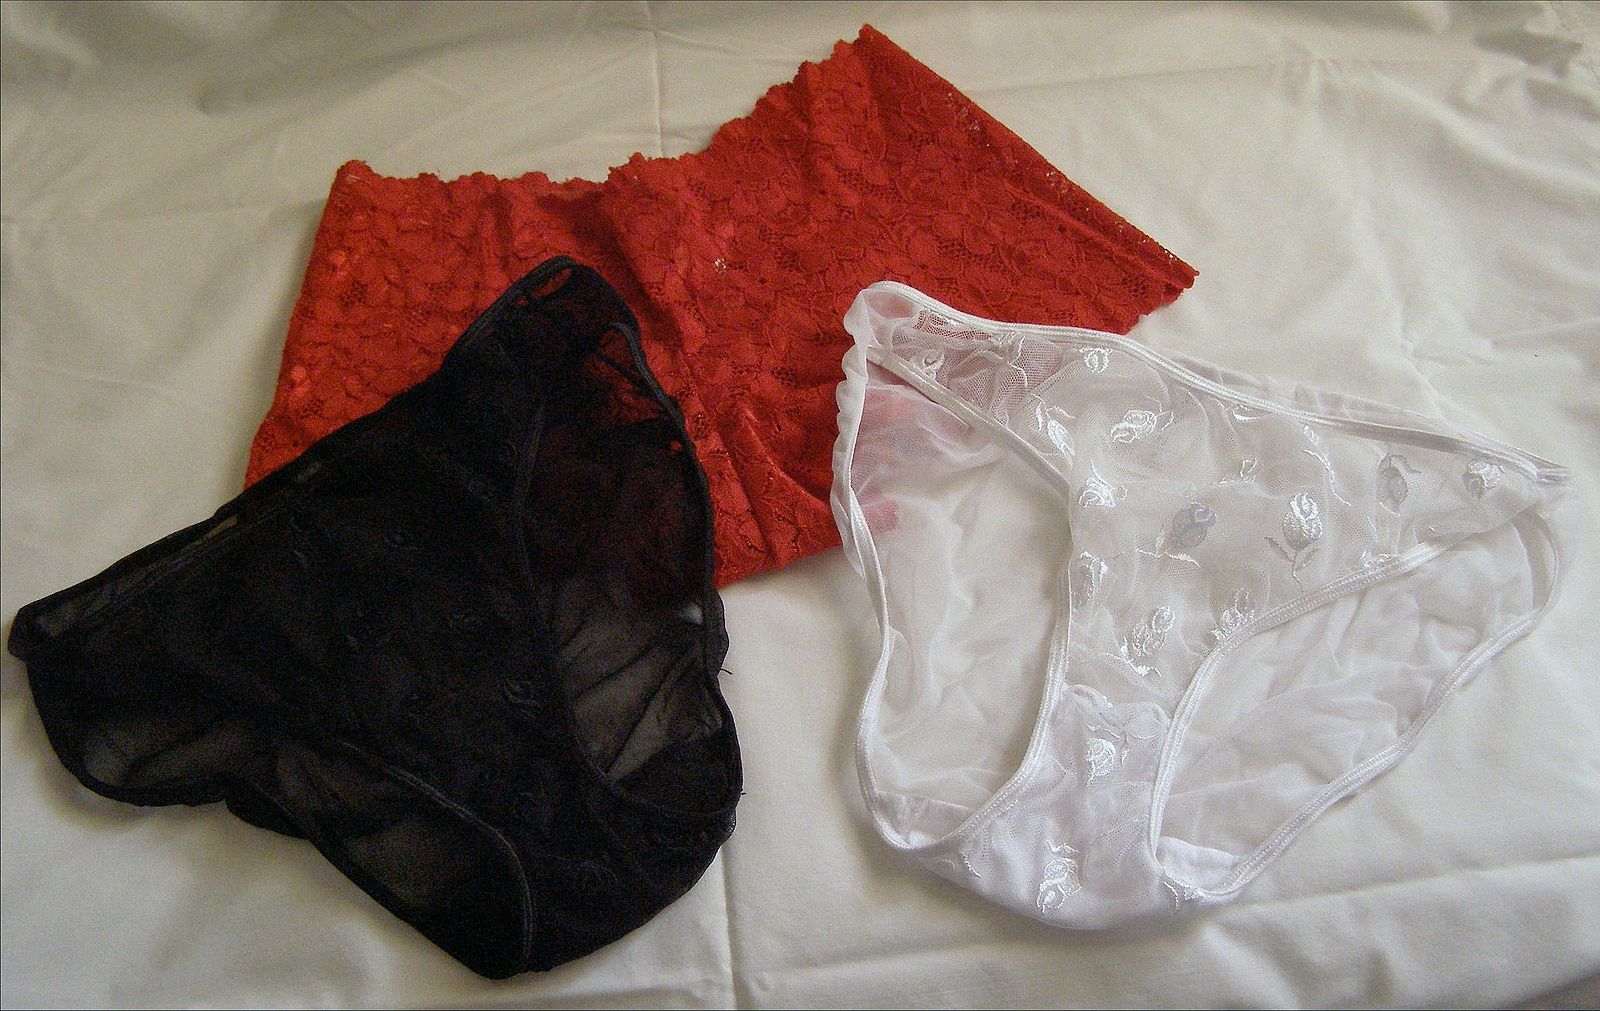 How to Make Money Selling Your Used Underwear and Dirty Laundry